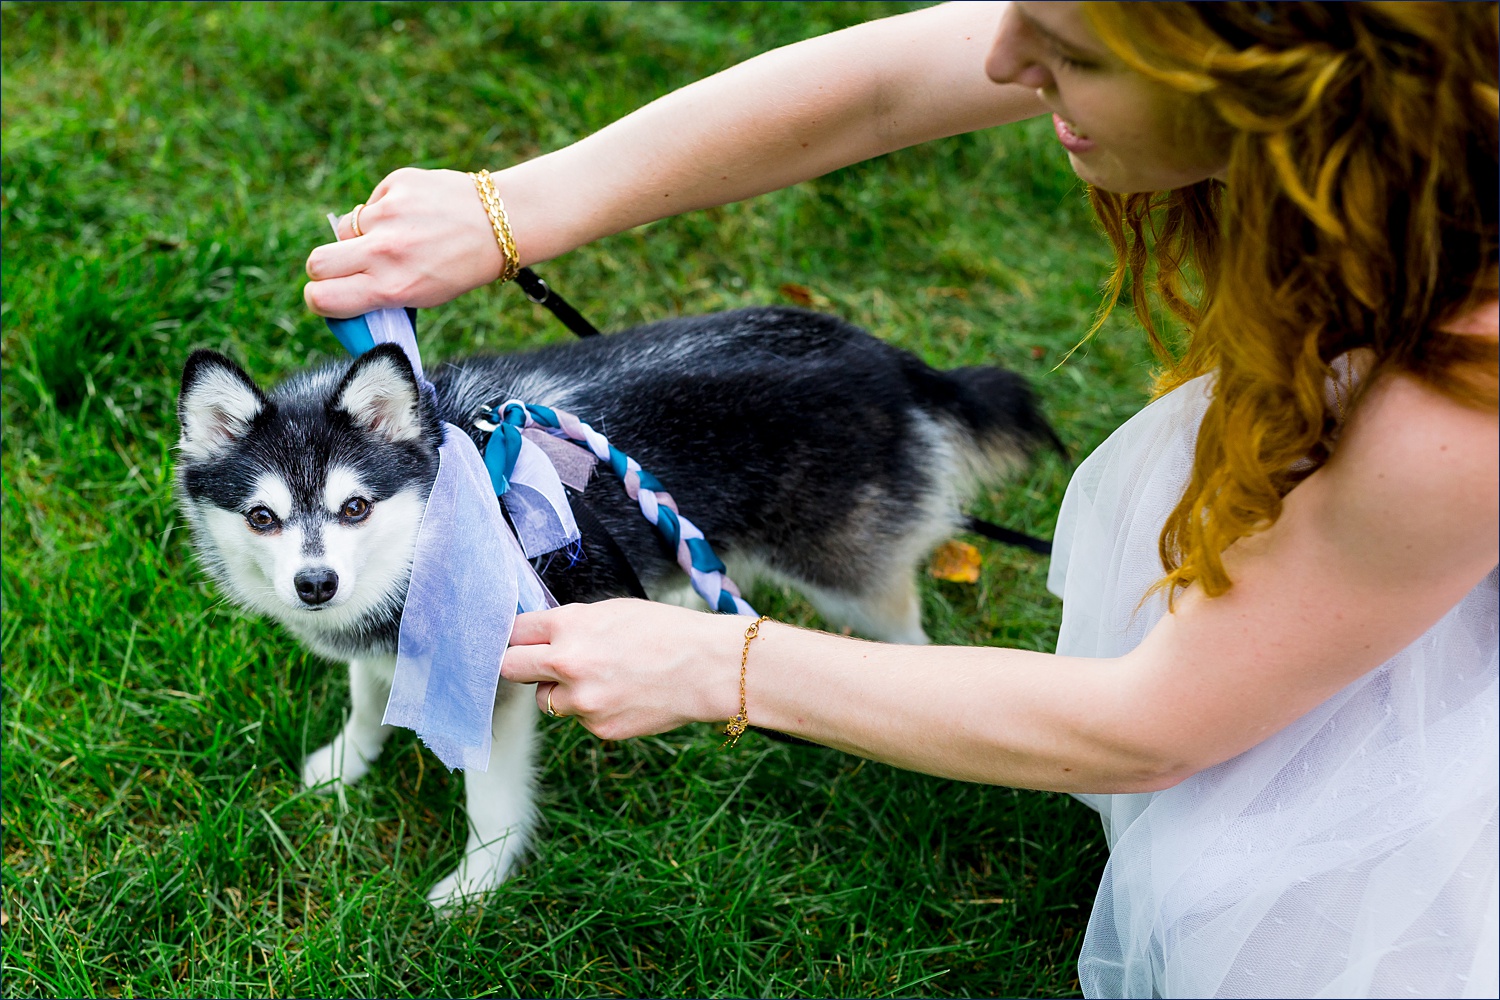 The couple's dog joins them for their backyard wedding day!